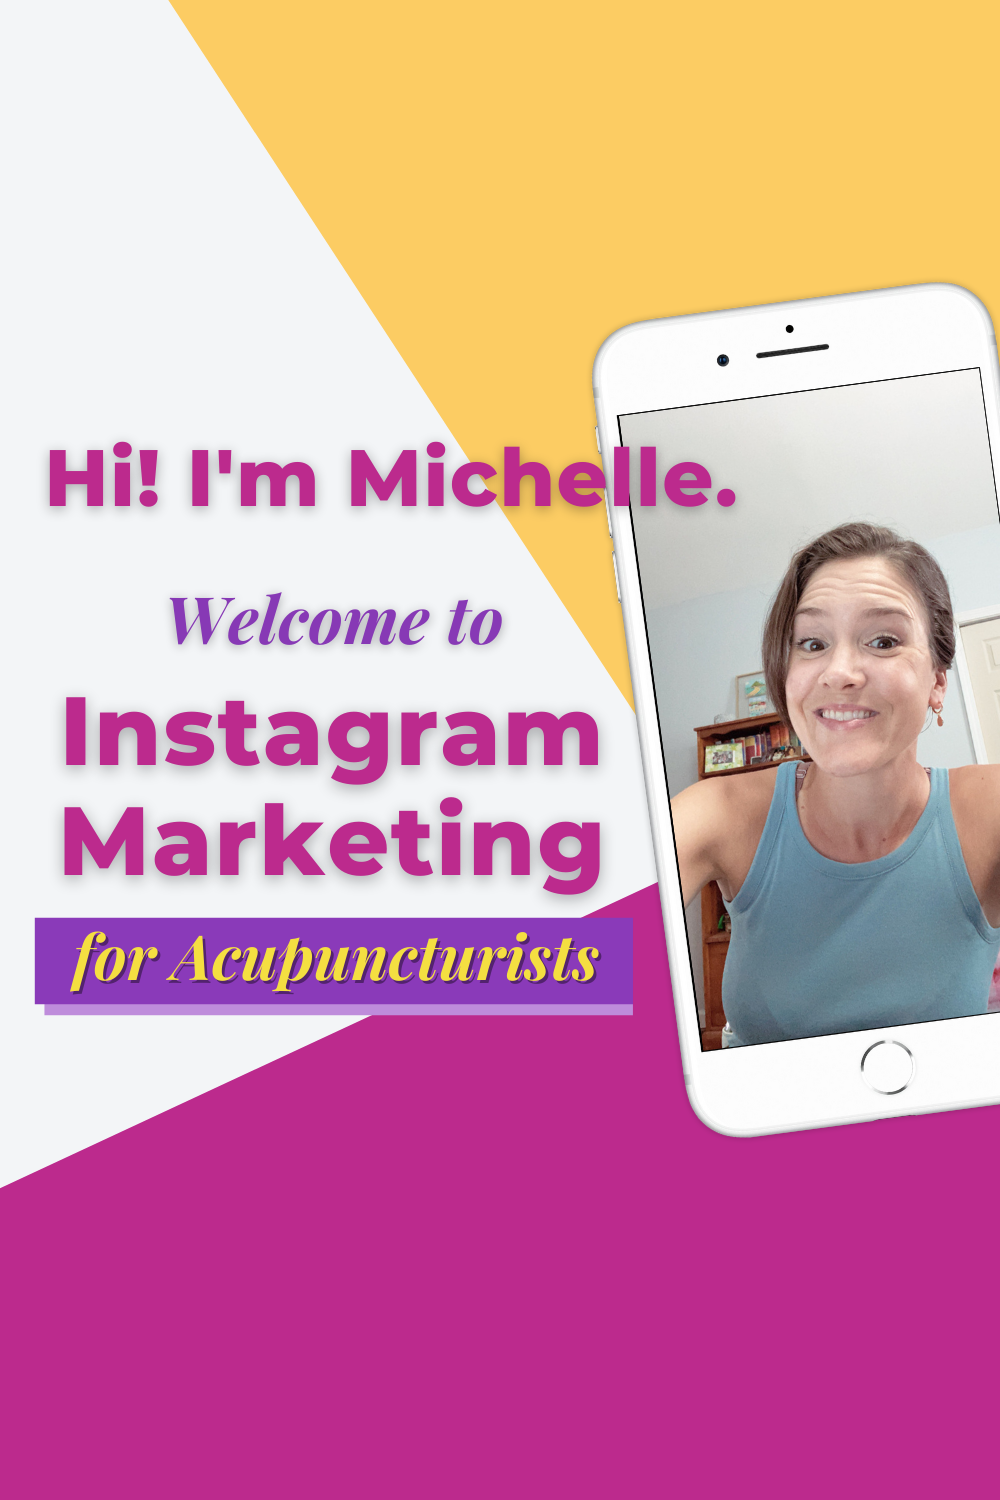 Instagram Marketing for Acupuncturists Digital Course by IG expert and acupuncturist Michelle Grasek